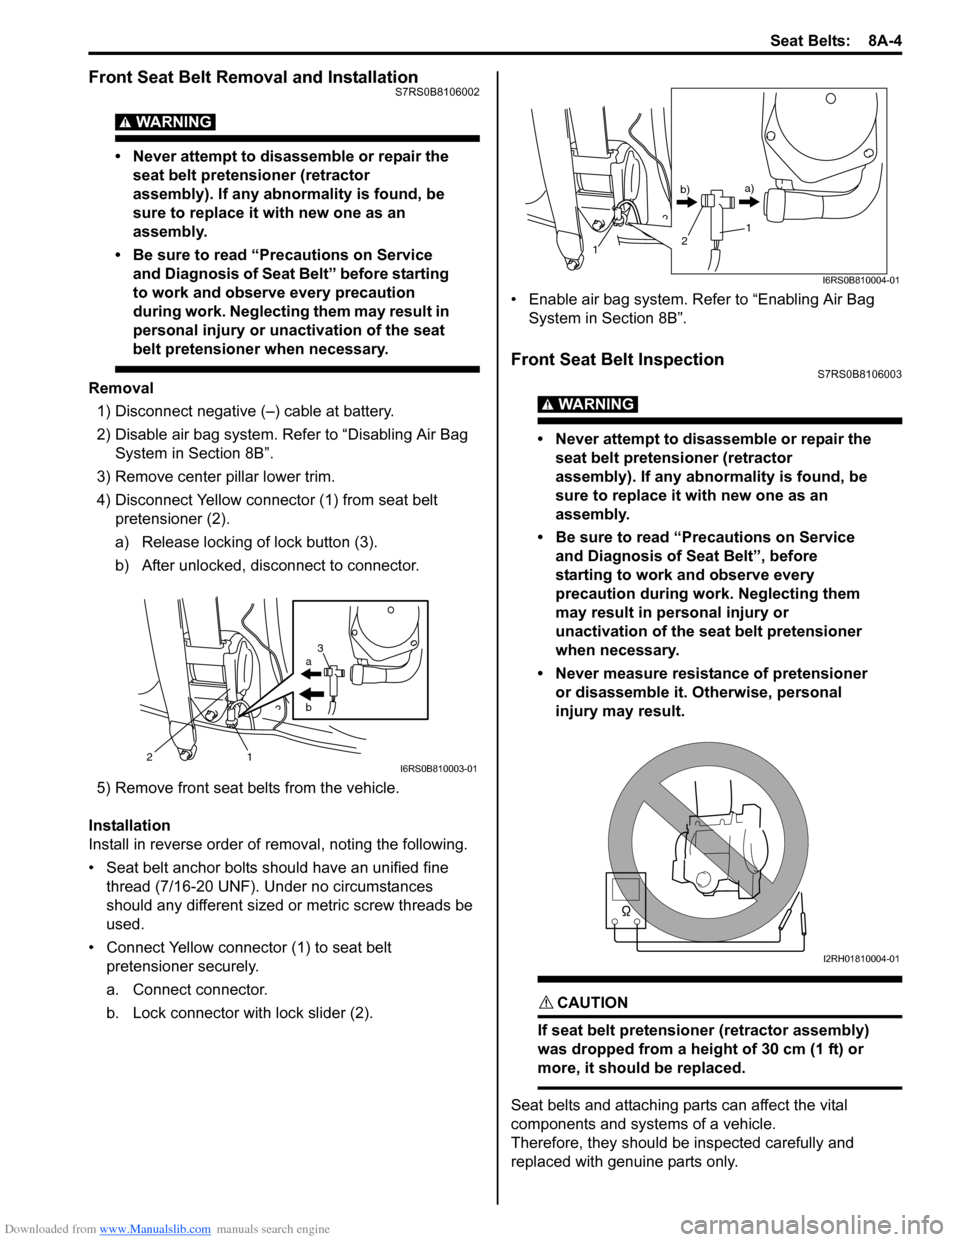 SUZUKI SWIFT 2006 2.G Service Service Manual Downloaded from www.Manualslib.com manuals search engine Seat Belts:  8A-4
Front Seat Belt Removal and InstallationS7RS0B8106002
WARNING! 
• Never attempt to disassemble or repair the seat belt pret